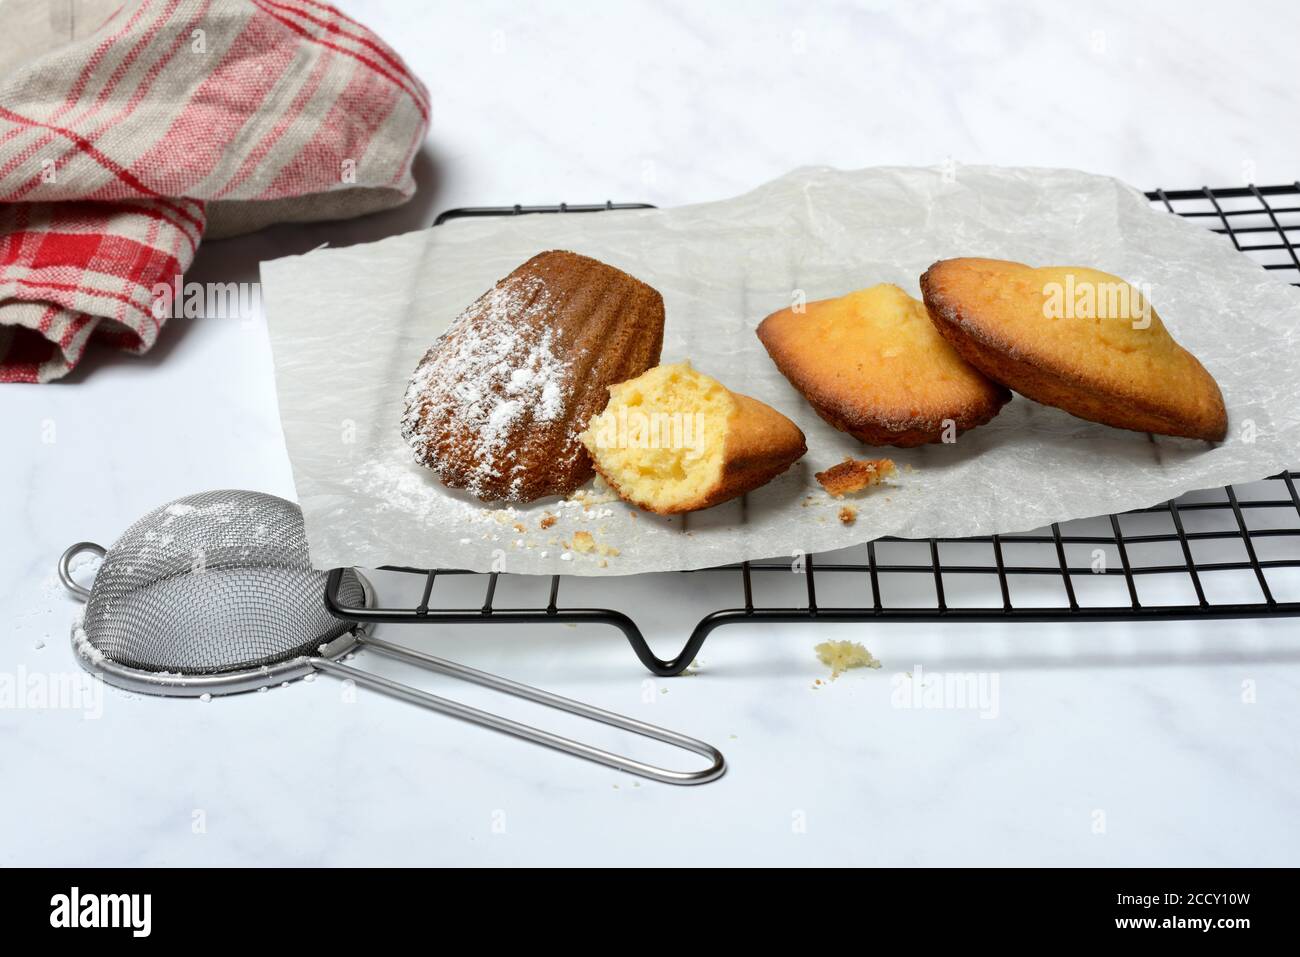 Pastries, madeleines on cake grid, Germany Stock Photo